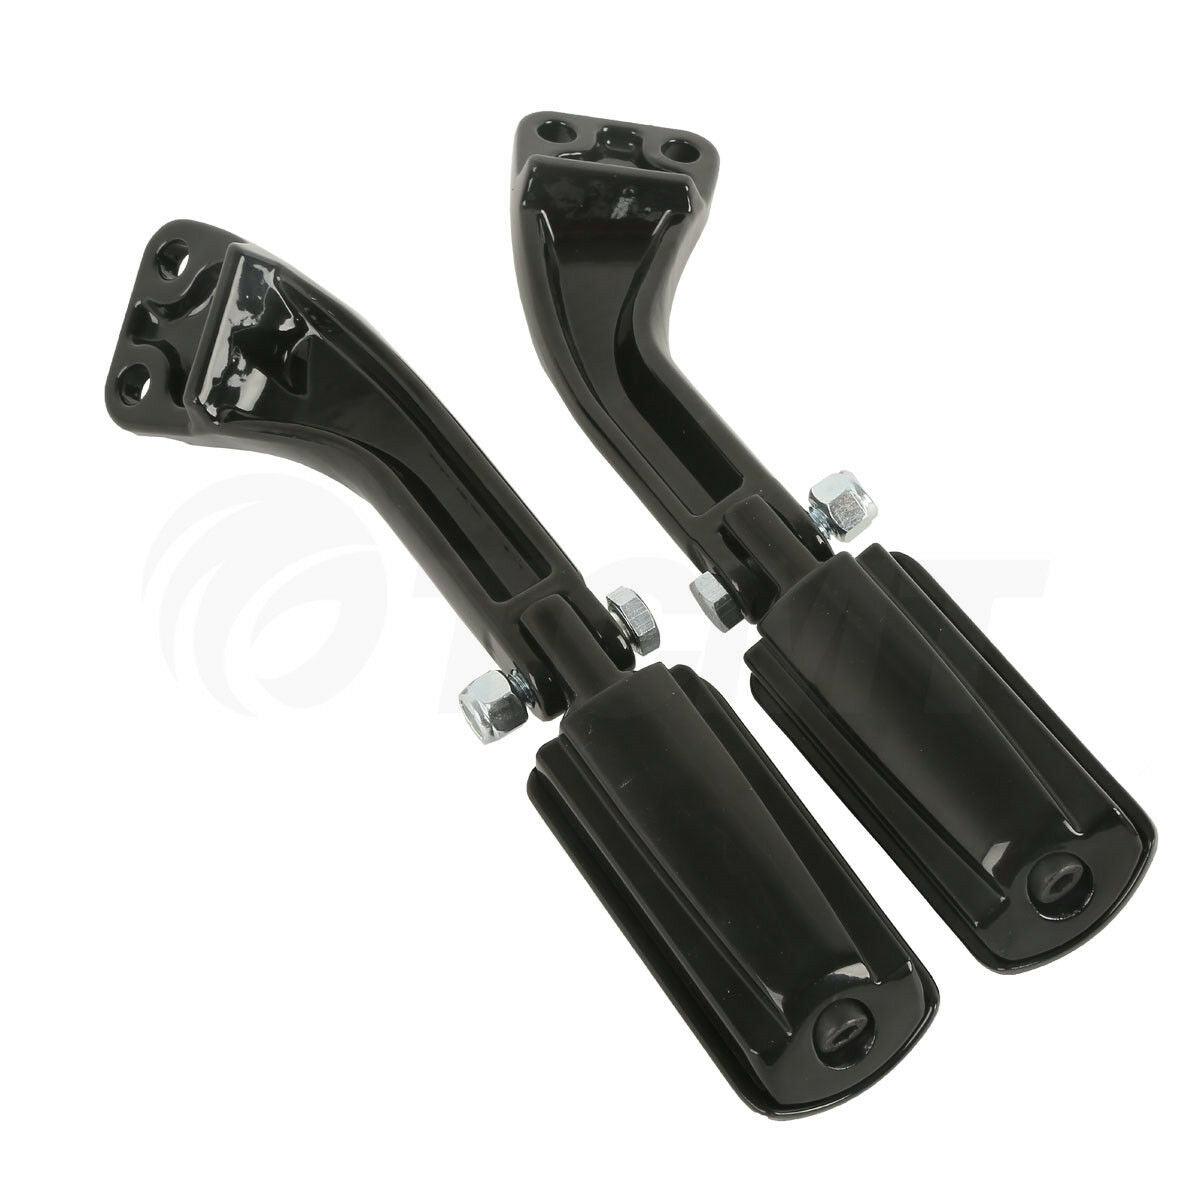 Rear Passenger Foot Pegs Mount Support Bracket For Harley Dyna Street Bob 07-17 - Moto Life Products